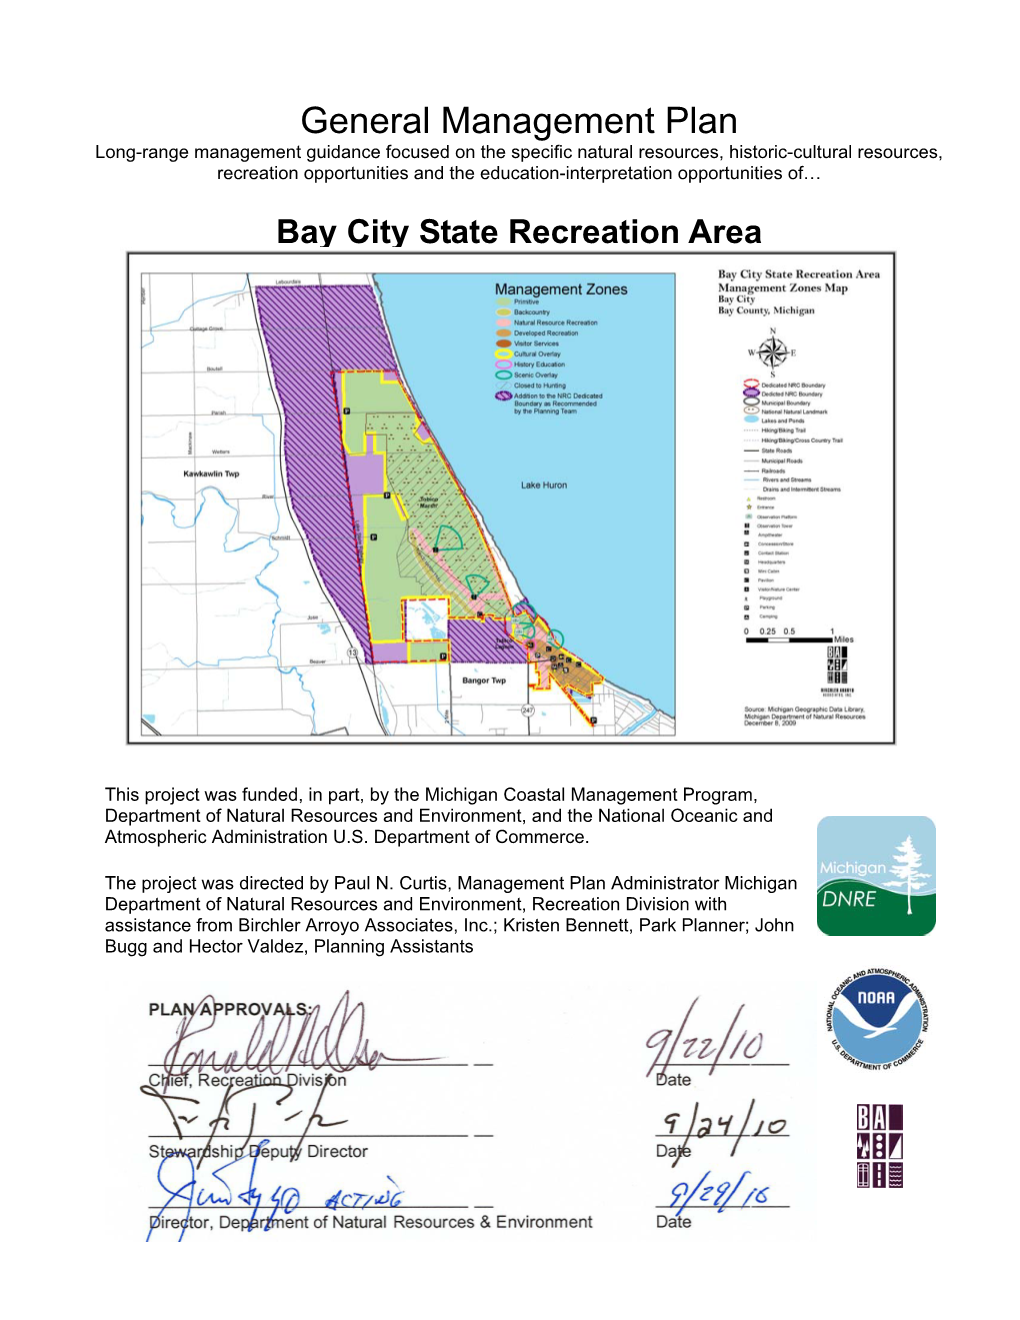 Bay City State Park Phase 1 General Management Plan